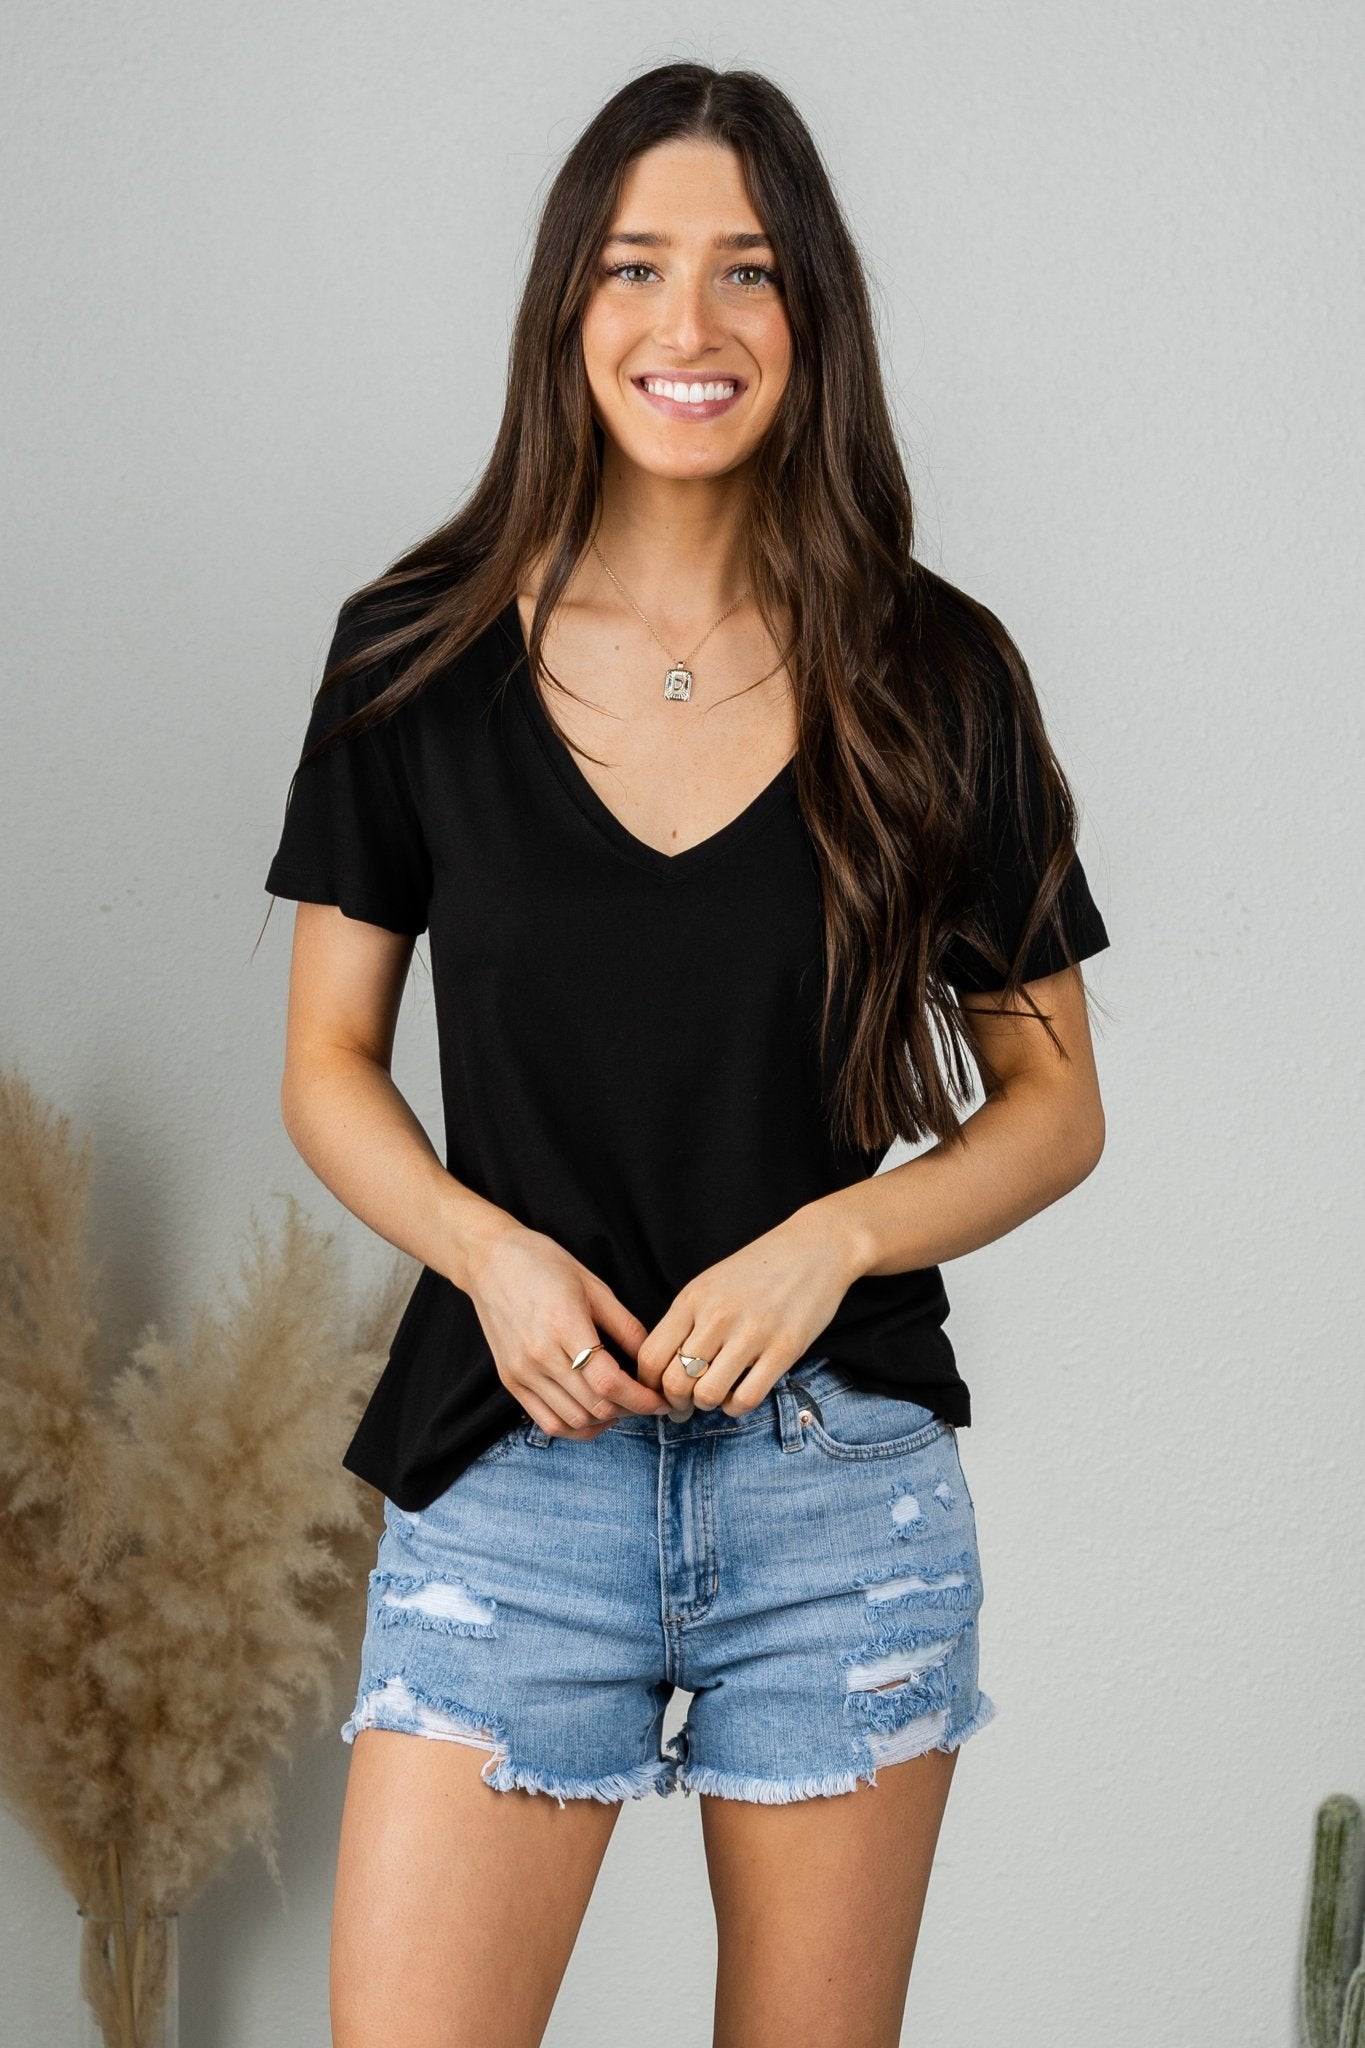 Z Supply Kasey modal v-neck top black - Z Supply Top - Z Supply Tops, Dresses, Tanks, Tees, Cardigans, Joggers and Loungewear at Lush Fashion Lounge